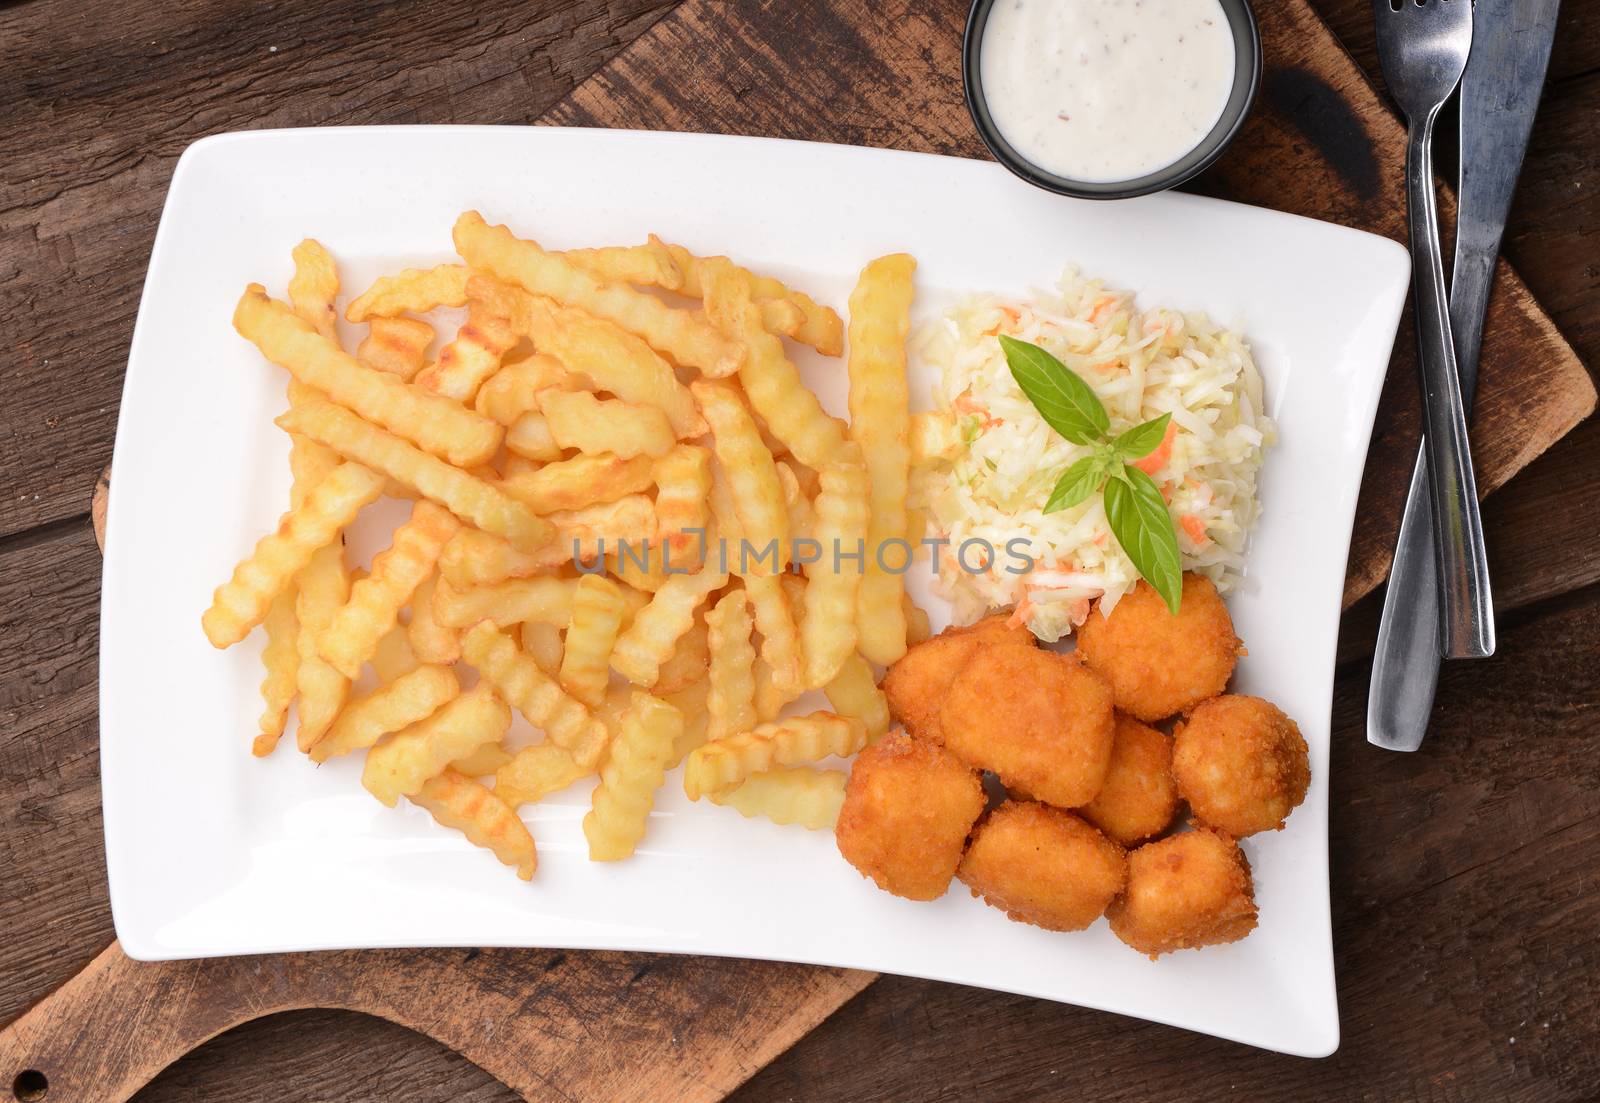 Fries with chicken nuggets and salad